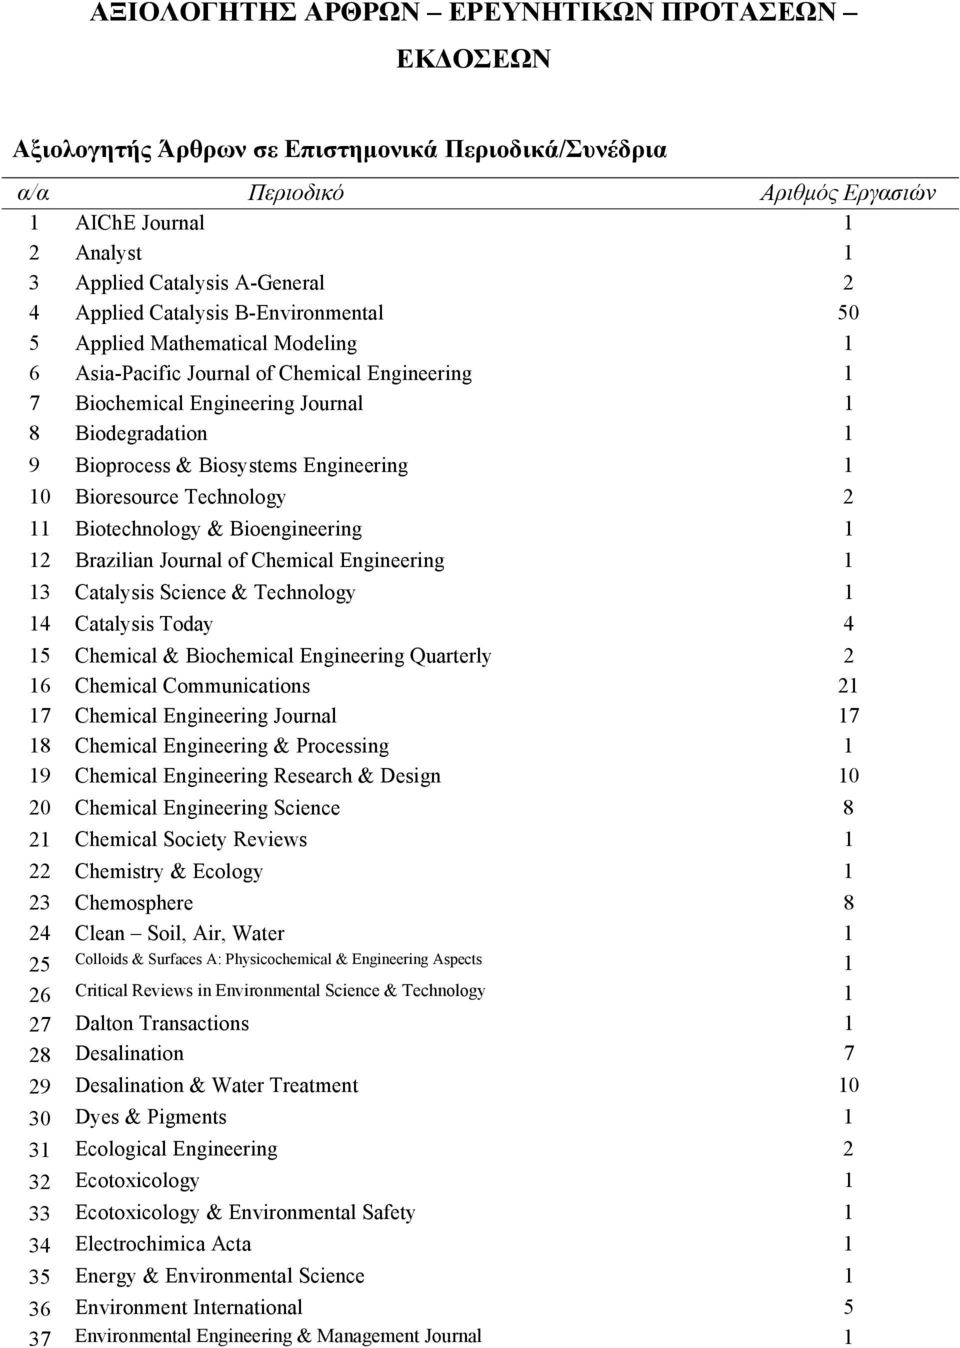 Biosystems Engineering 1 10 Bioresource Technology 2 11 Biotechnology & Bioengineering 1 12 Brazilian Journal of Chemical Engineering 1 13 Catalysis Science & Technology 1 14 Catalysis Today 4 15